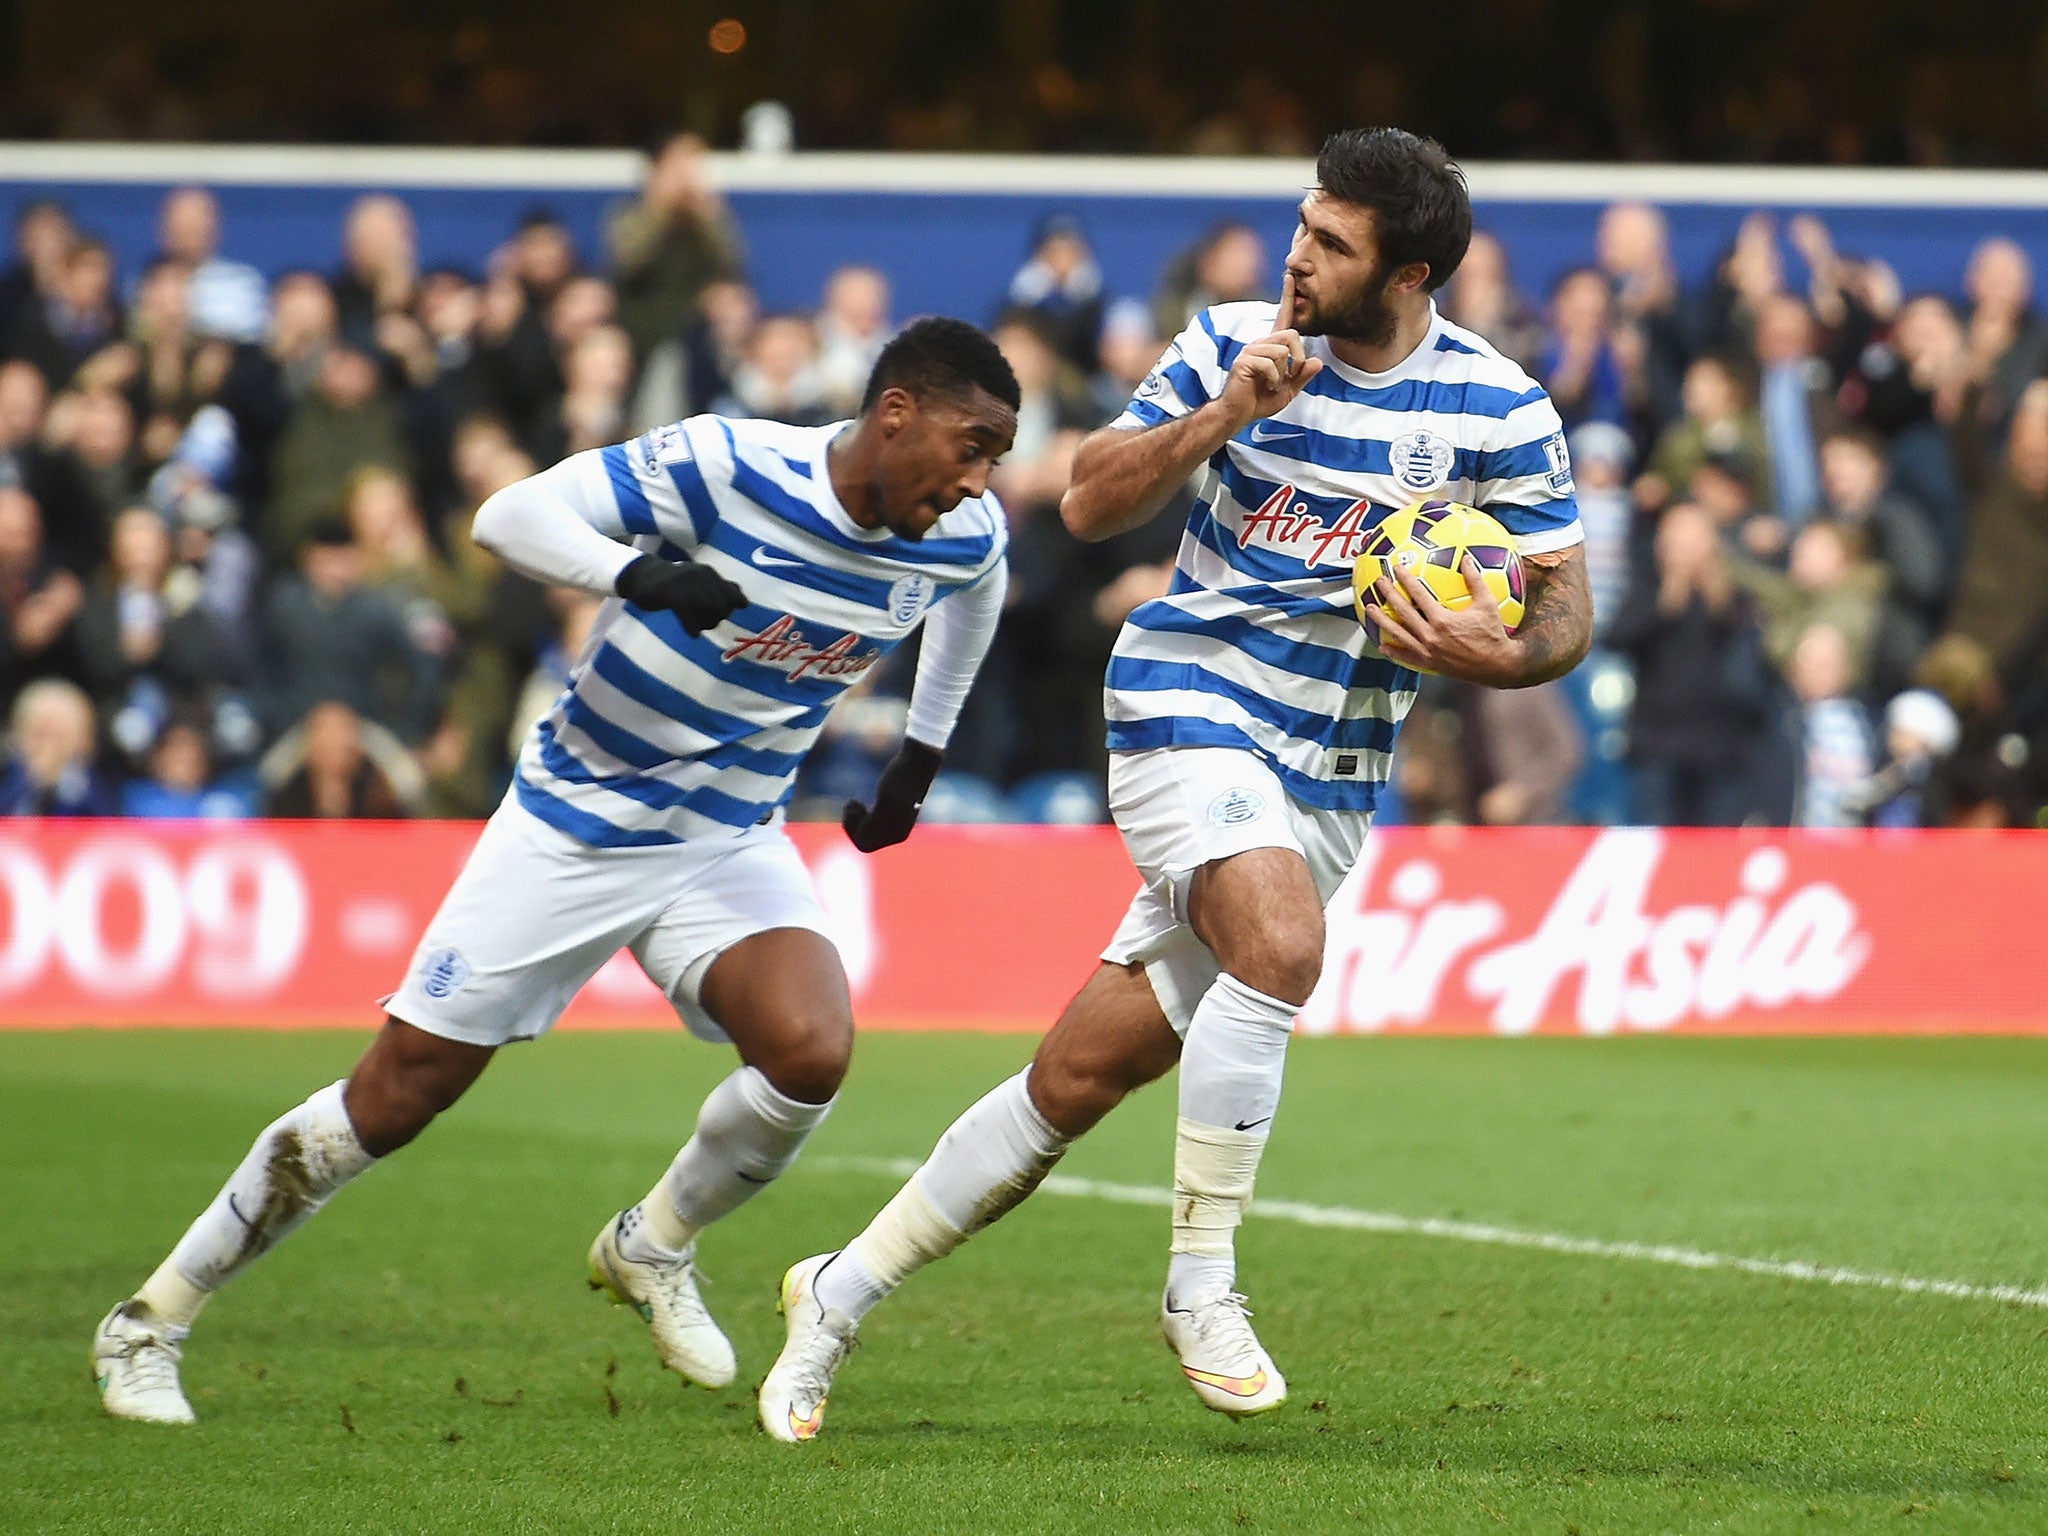 Charlie Austin rushes back after scoring his first goal of the game against West Brom